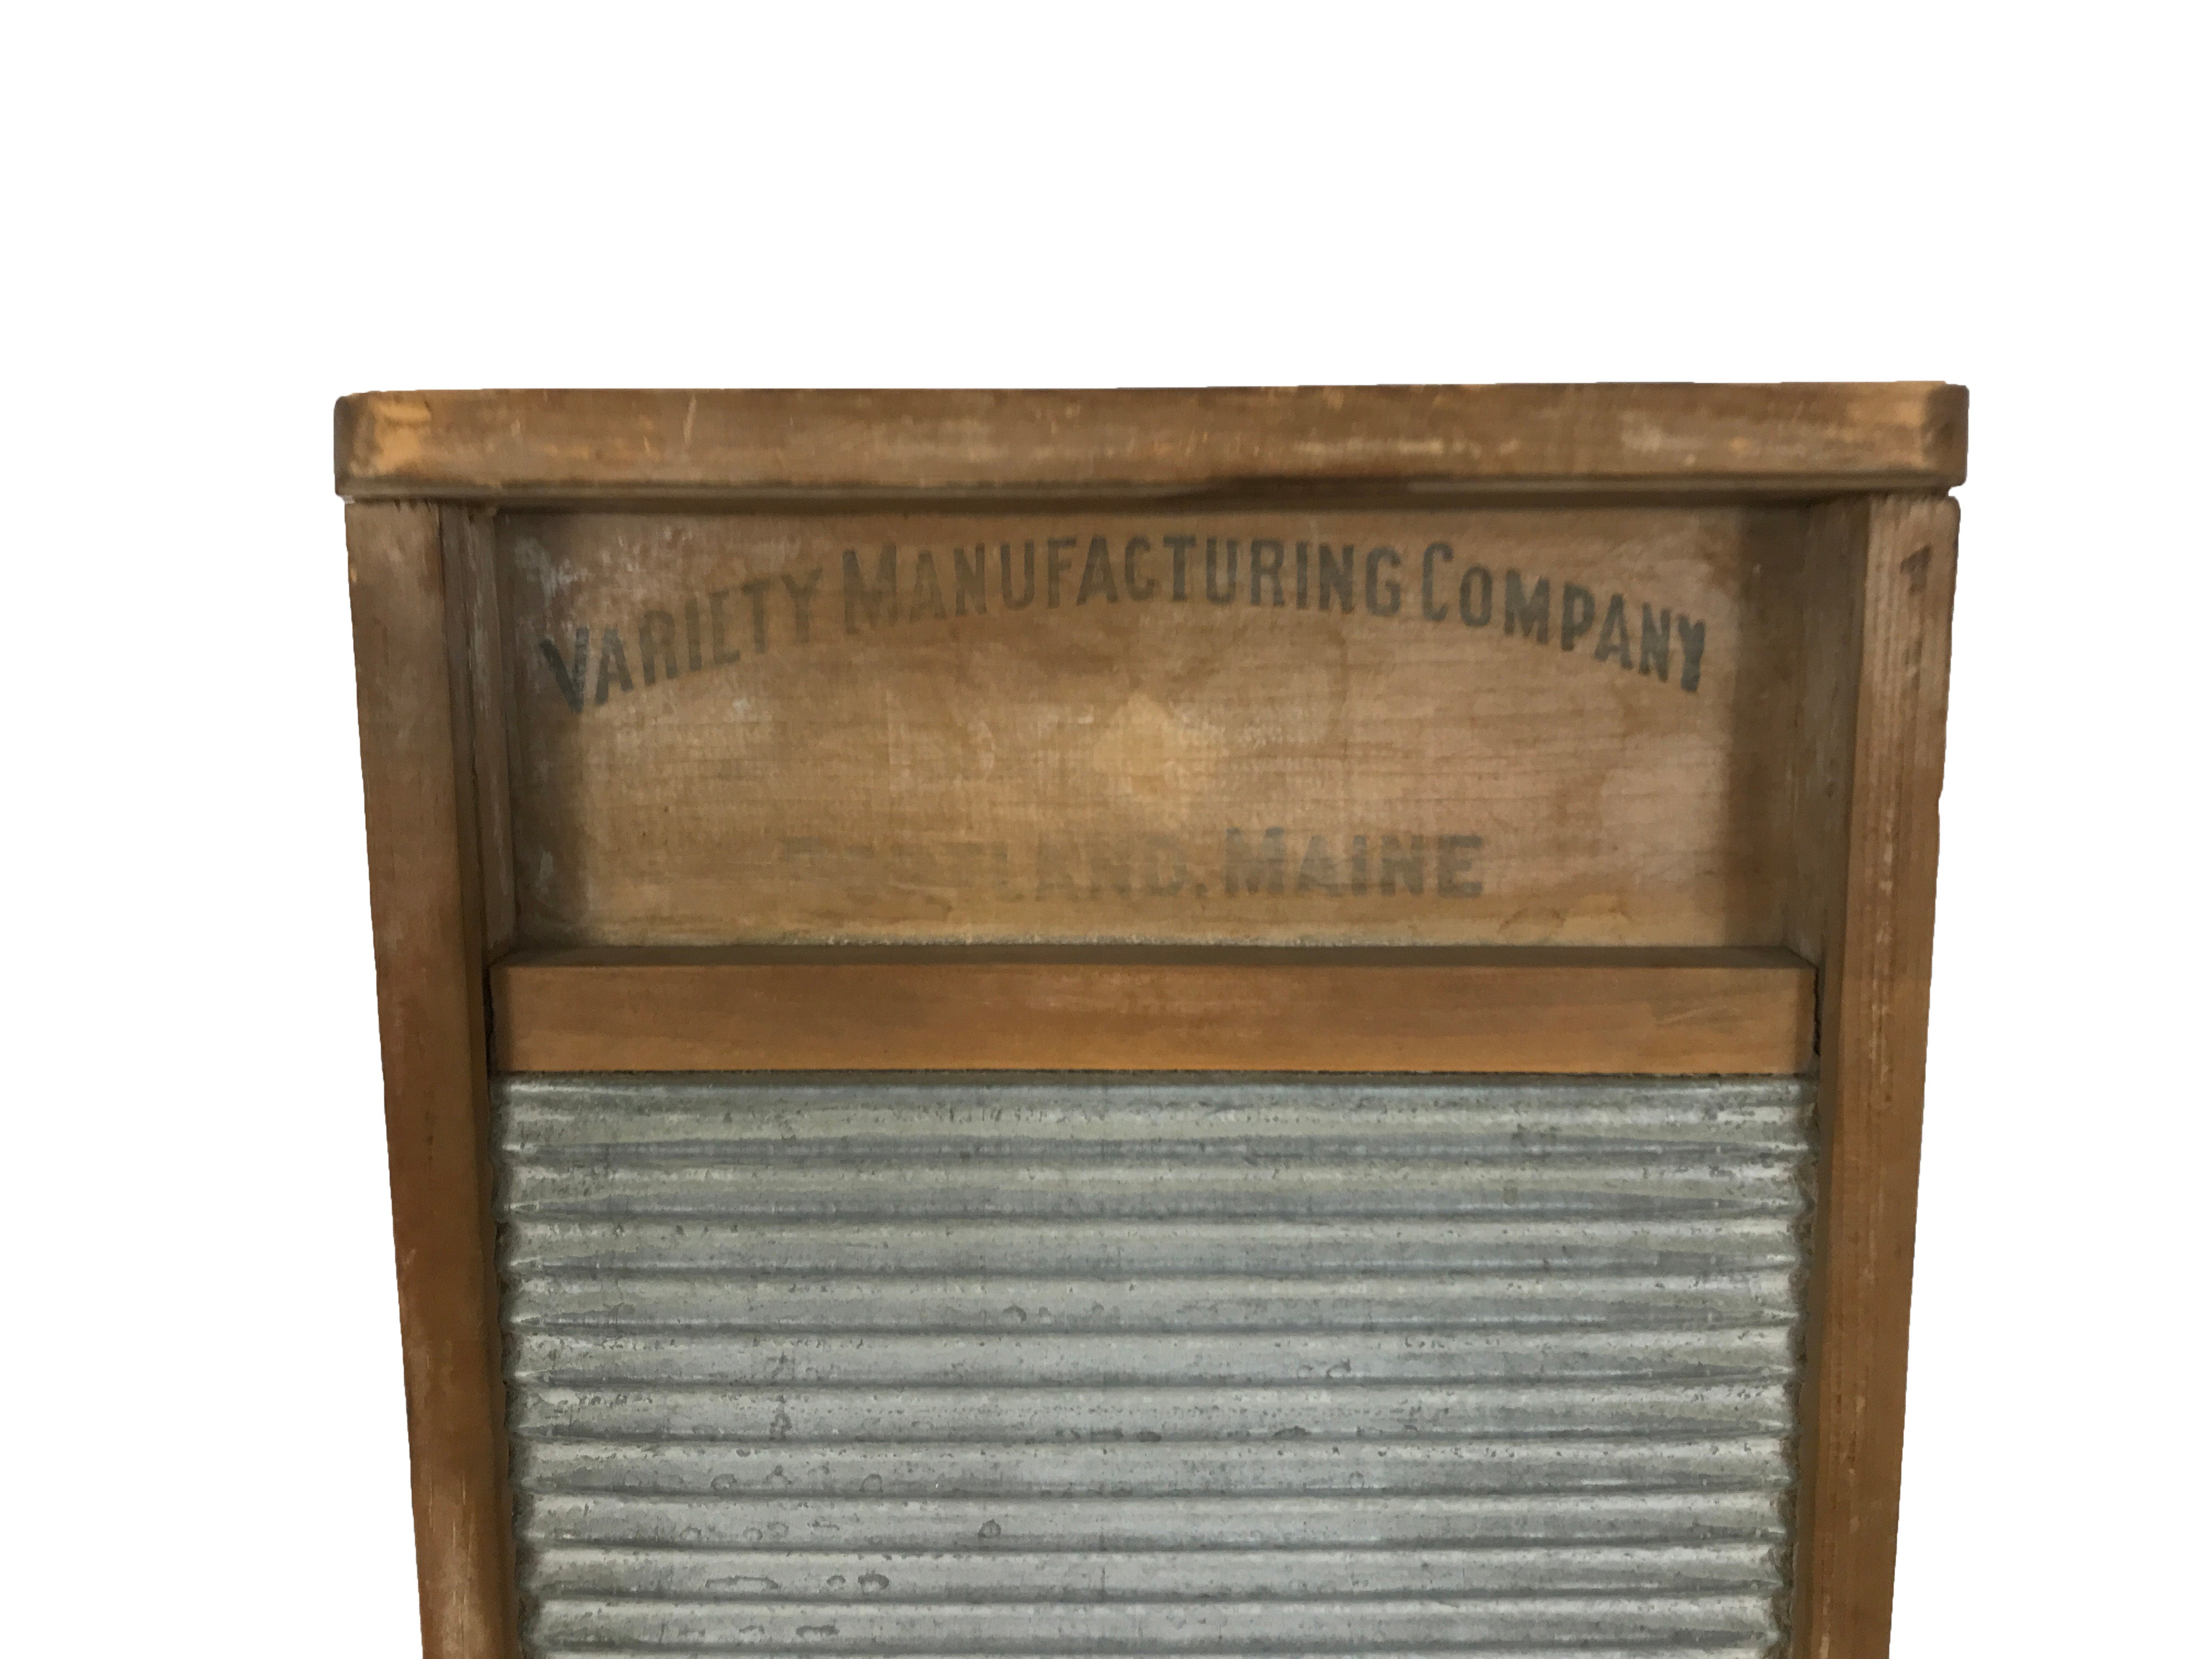 Variety Mfg. Co. Washboard with Ribbed Galvanized Metal Portland Maine